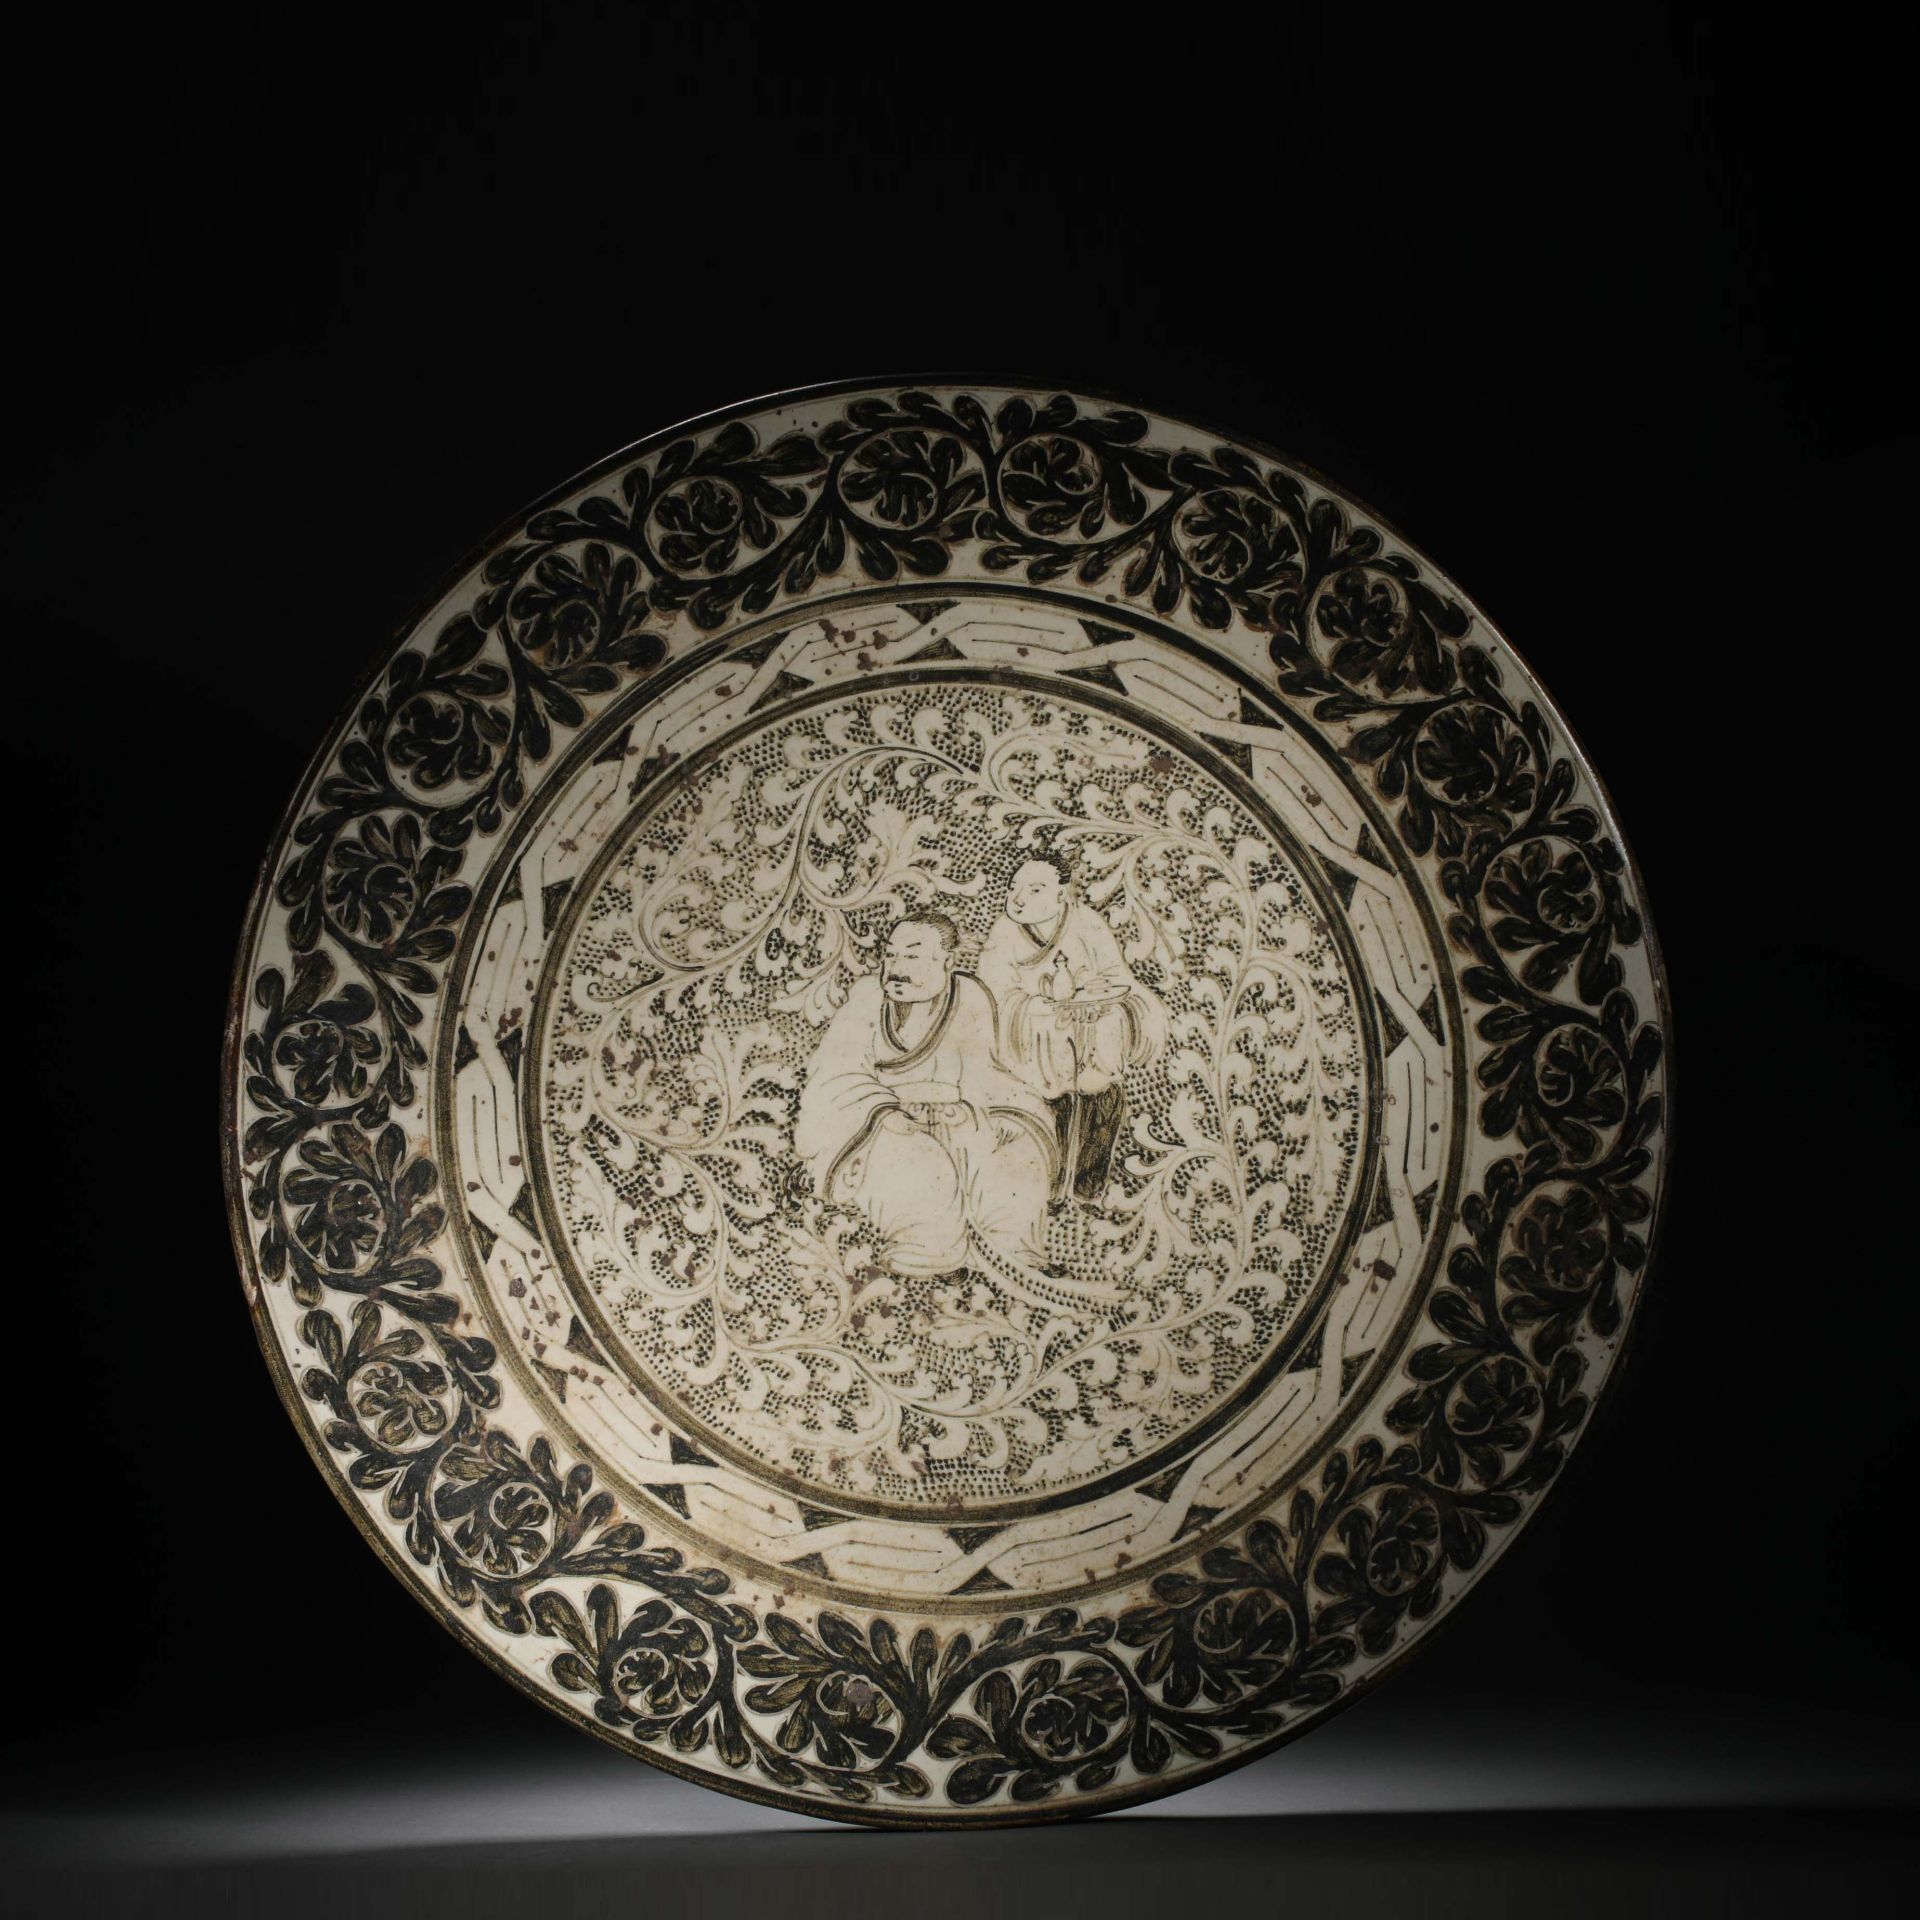 Song dynasty black glaze white black, darkly carved figure viewing plate